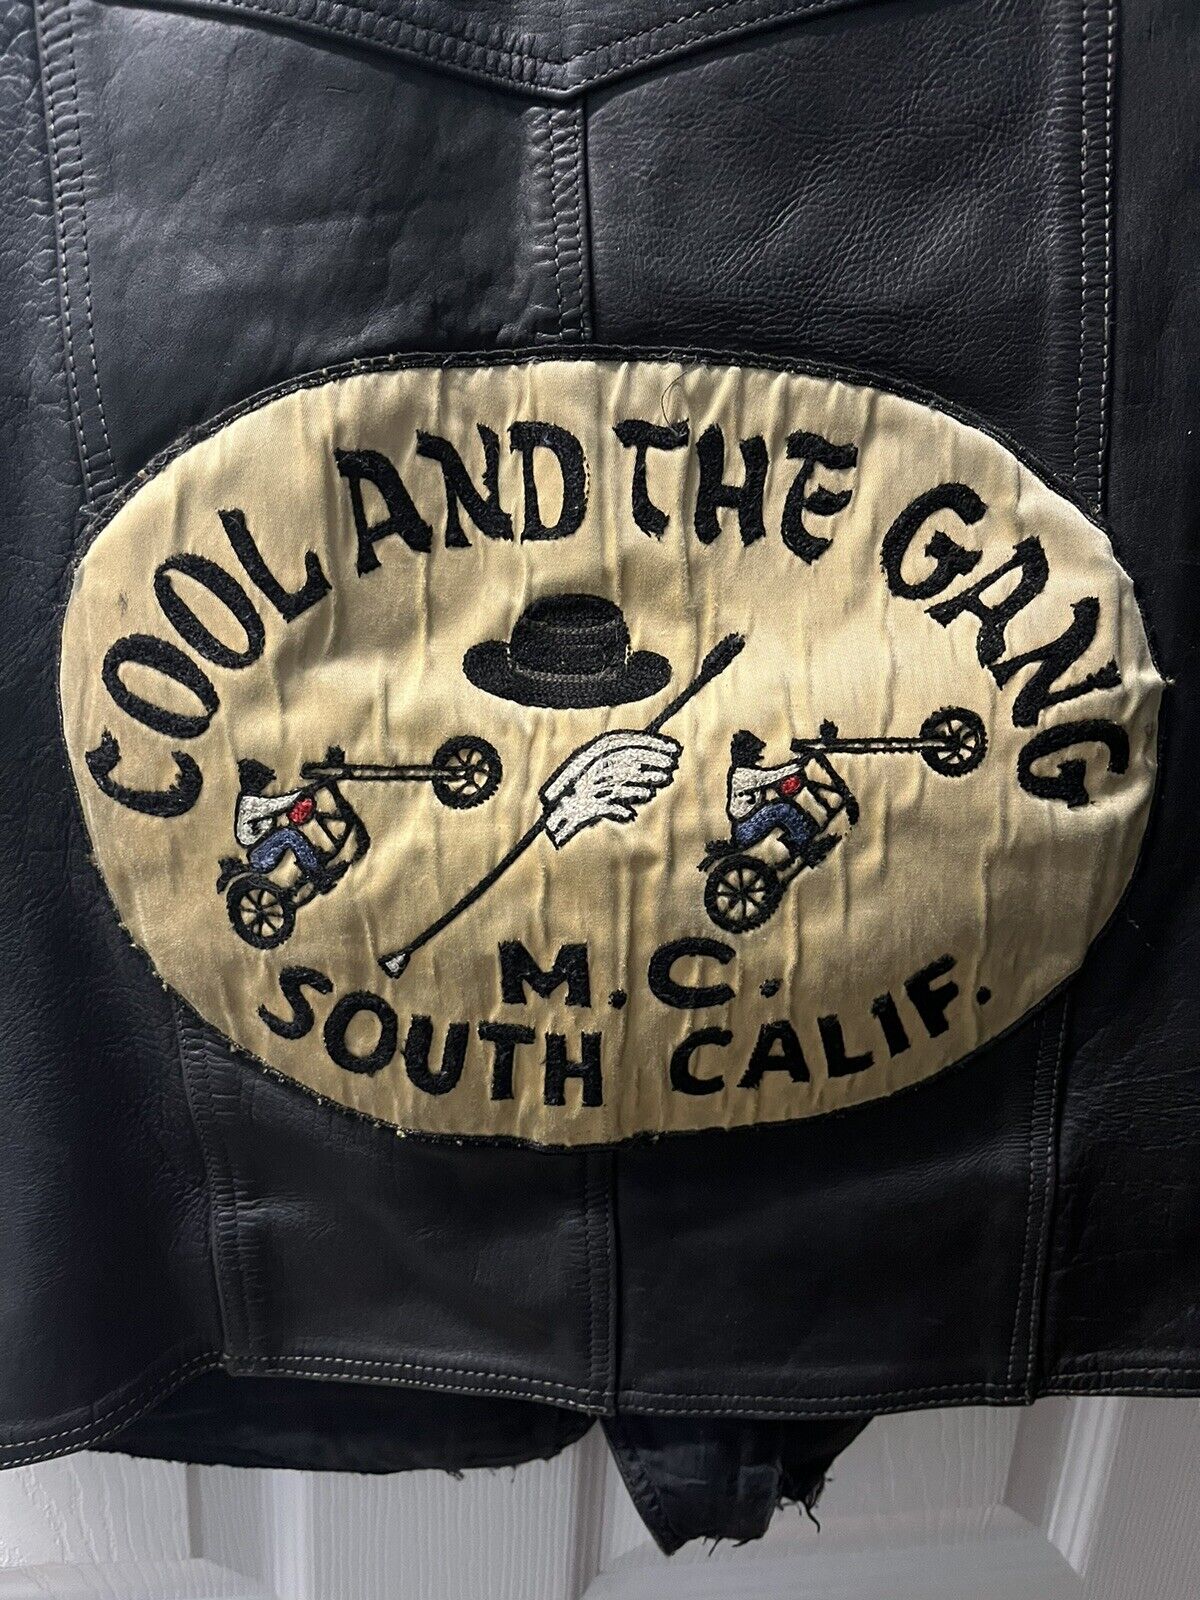 VINTAGE BIKER MOTORCYCLE CLUB COOL AND THE GANG SOUTH LA VEST & PATCH